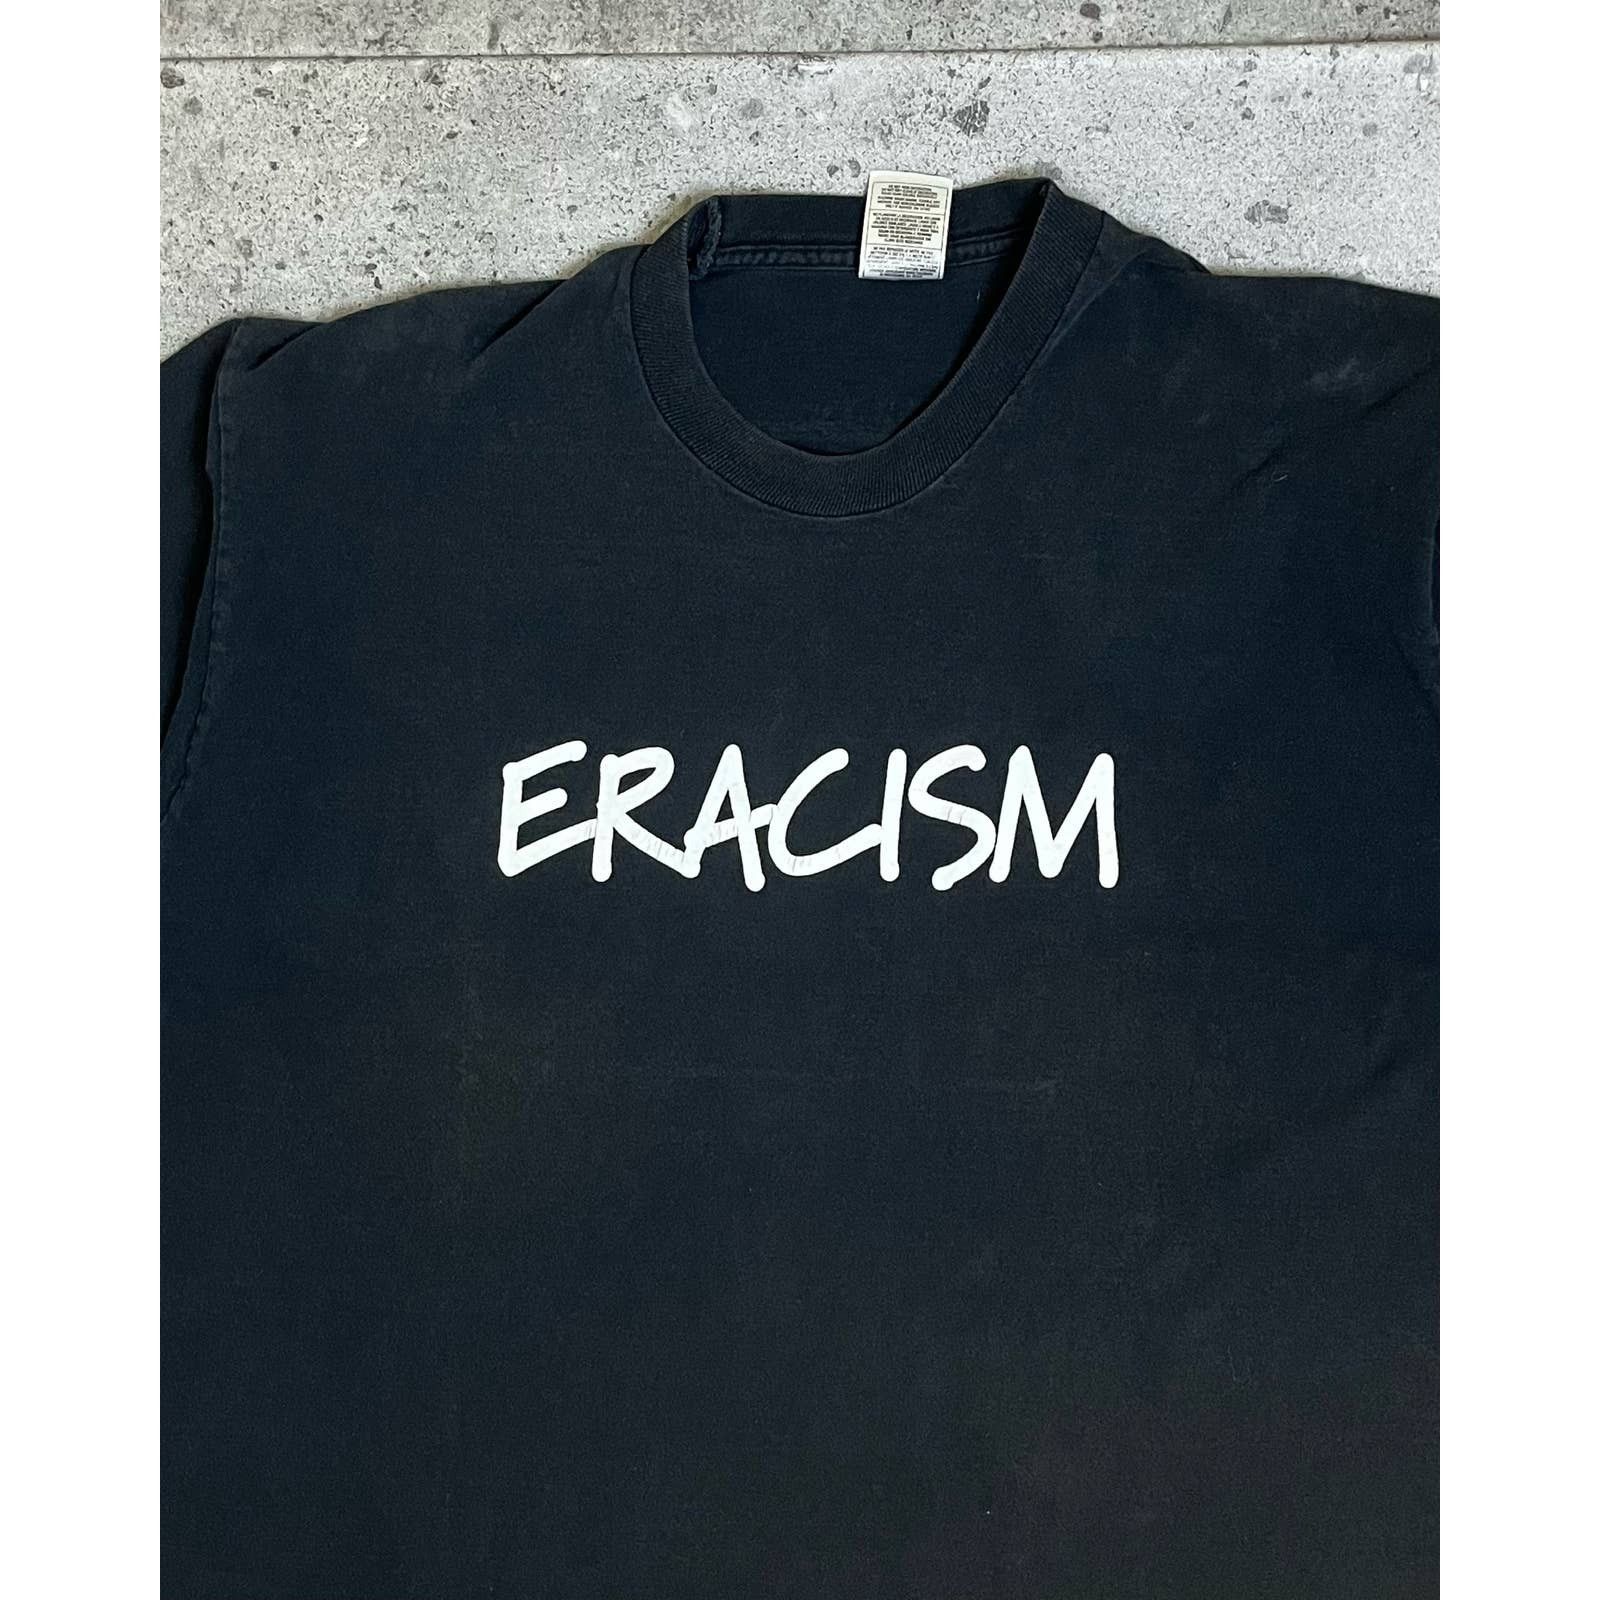 Fruit Of The Loom "Eracism" Tee (XL) - 1990s Size US XL / EU 56 / 4 - 2 Preview